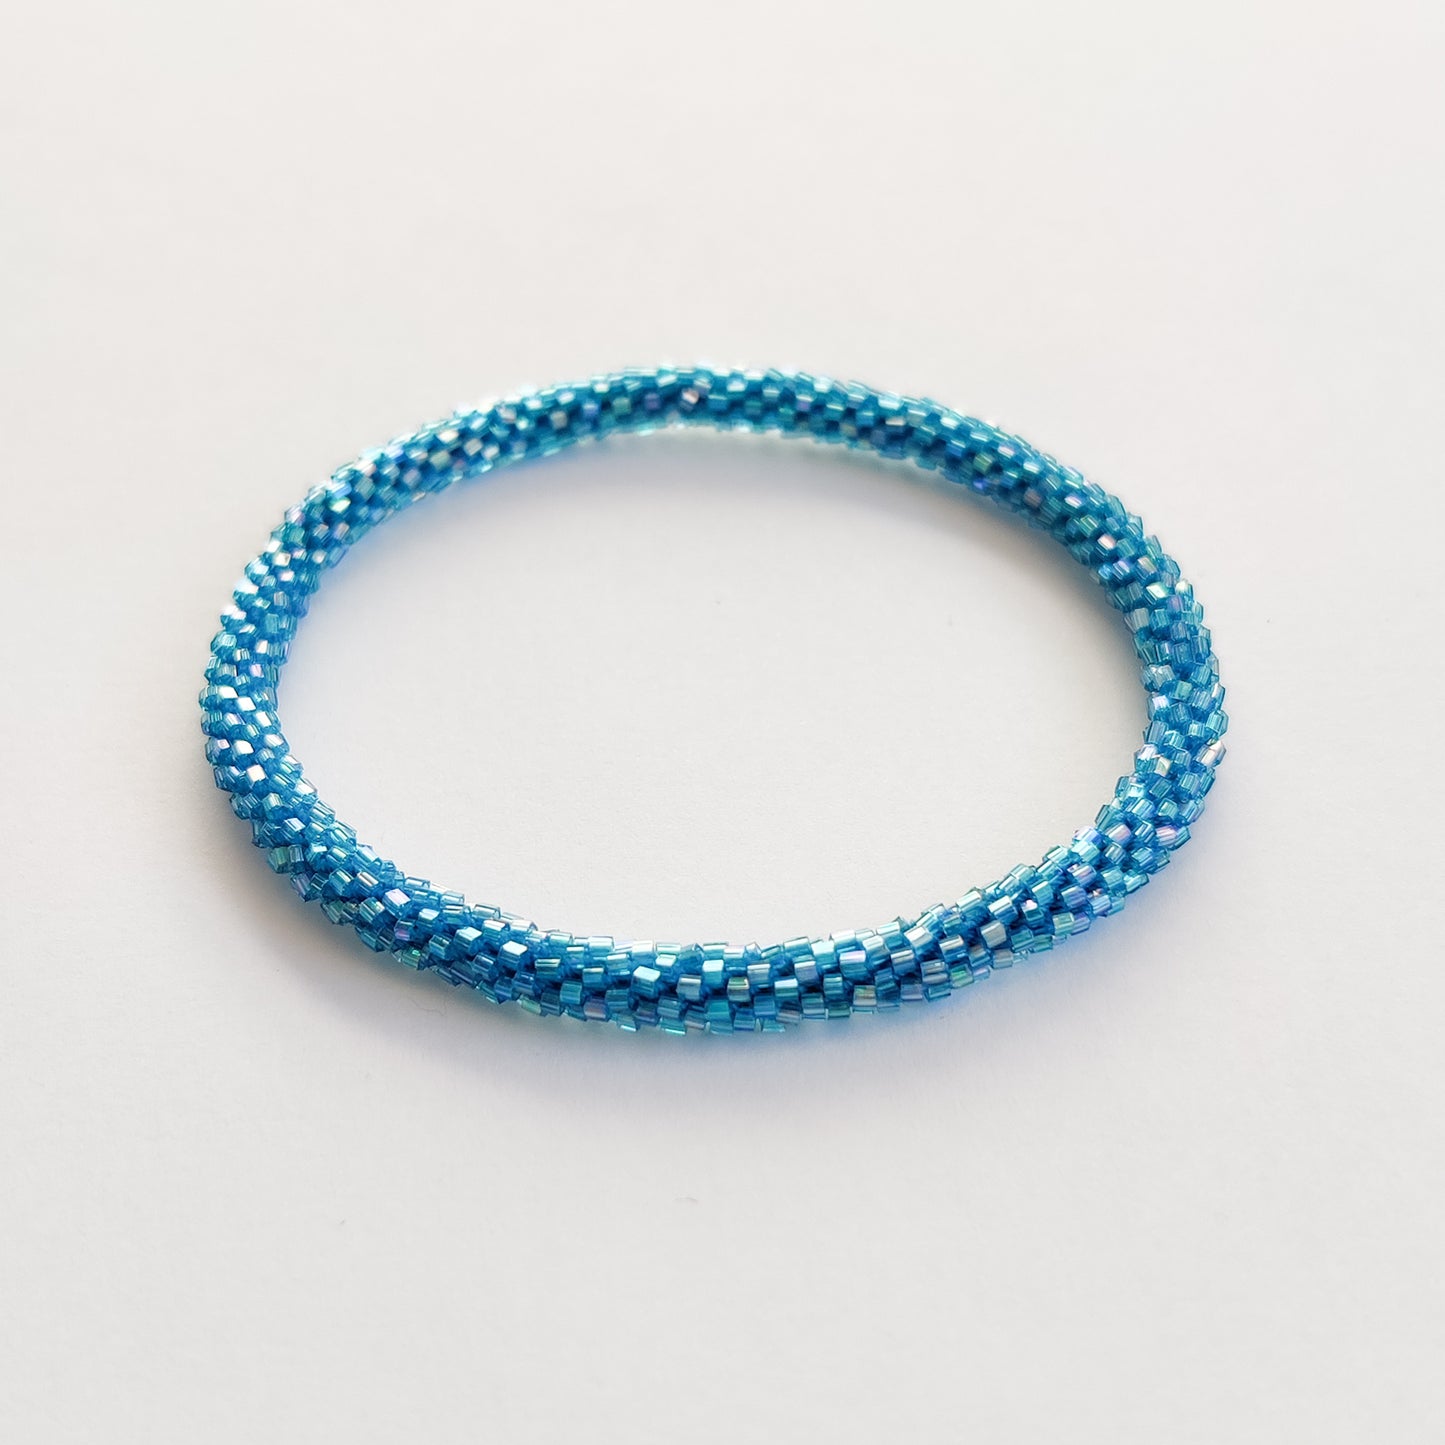 An Indian Summer Blue Ibiza Roll On Bracelet Glass Beads Arm Candy Stacking Bracelets